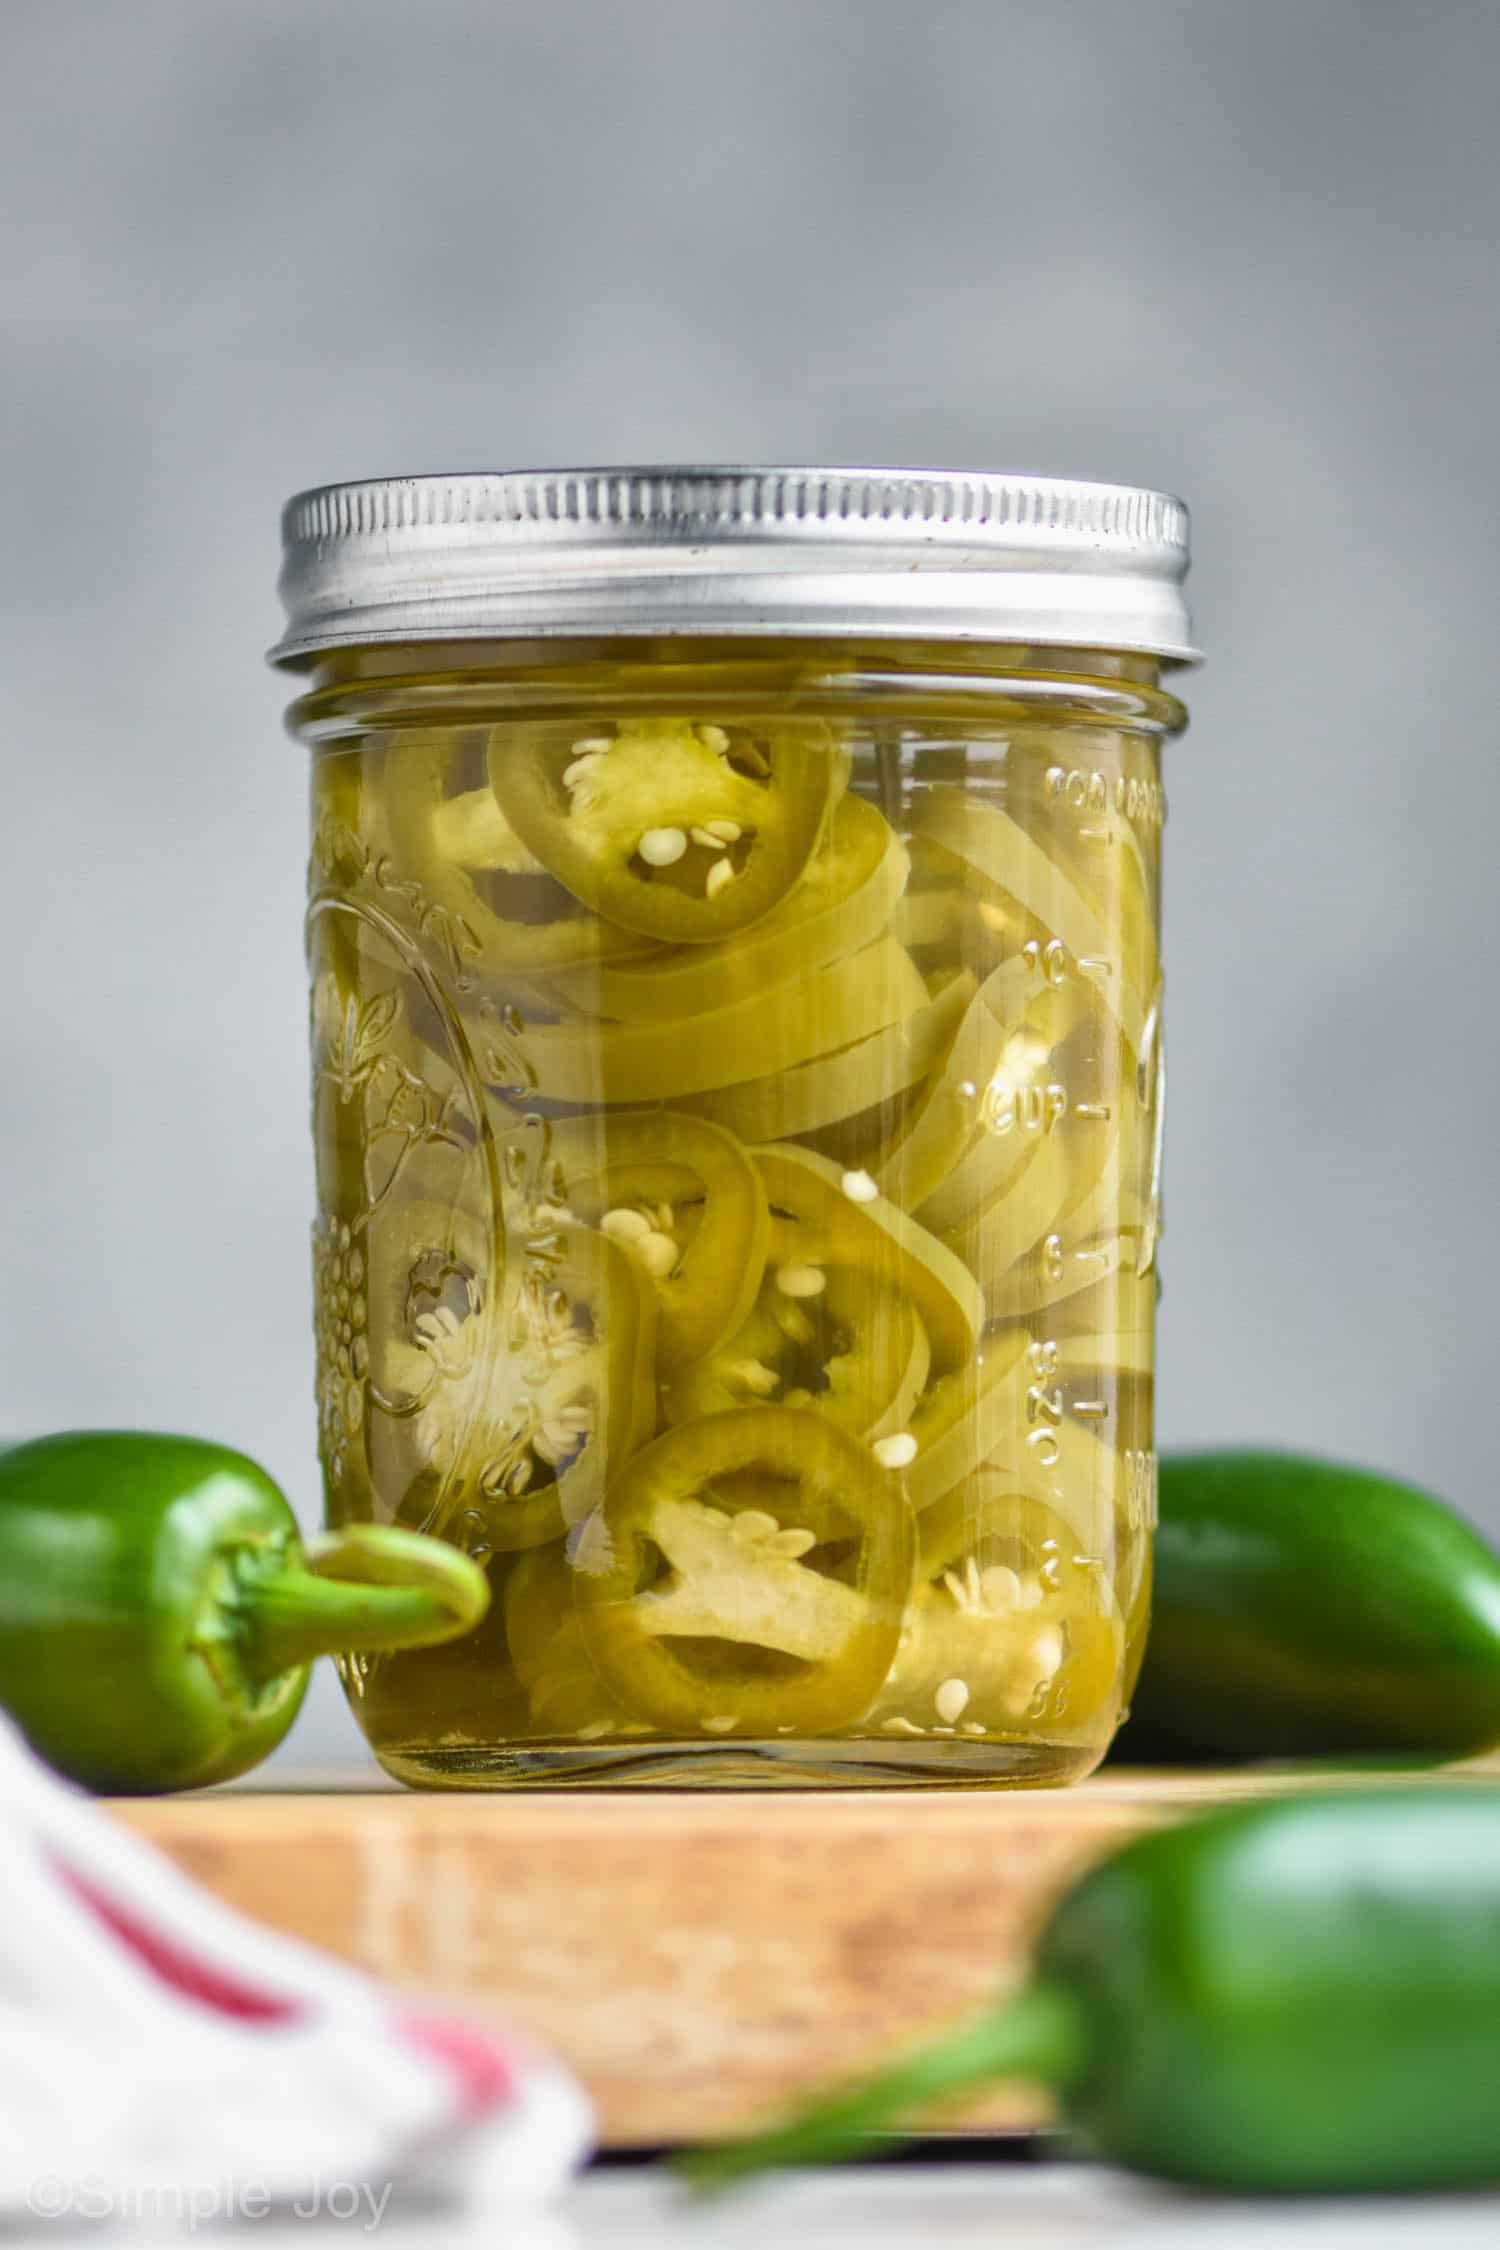 Homemade Quick Pickled Jalapenos (Spicy & Sweet) - Whole Made Living